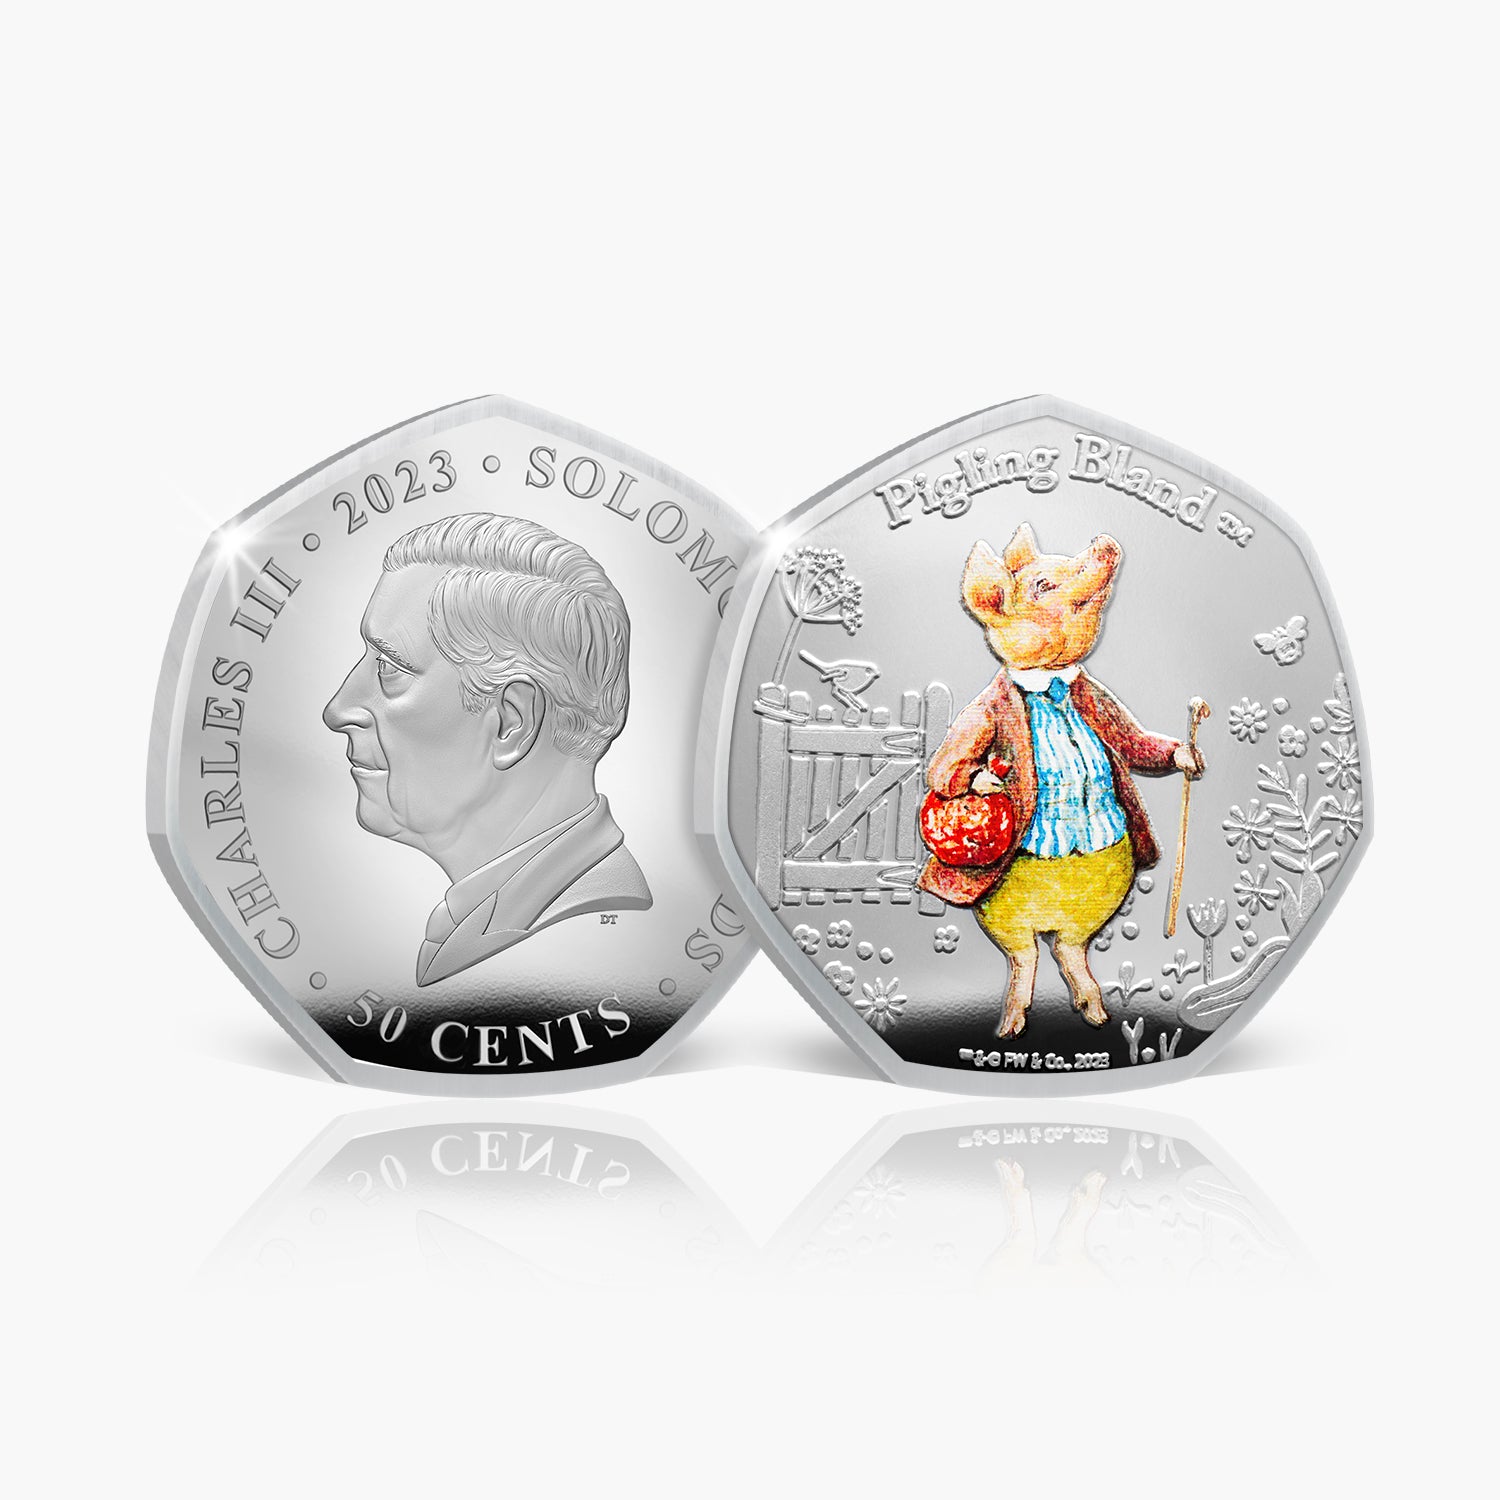 The World of Peter Rabbit 2023 Coin Collection - Pigling Bland Coin